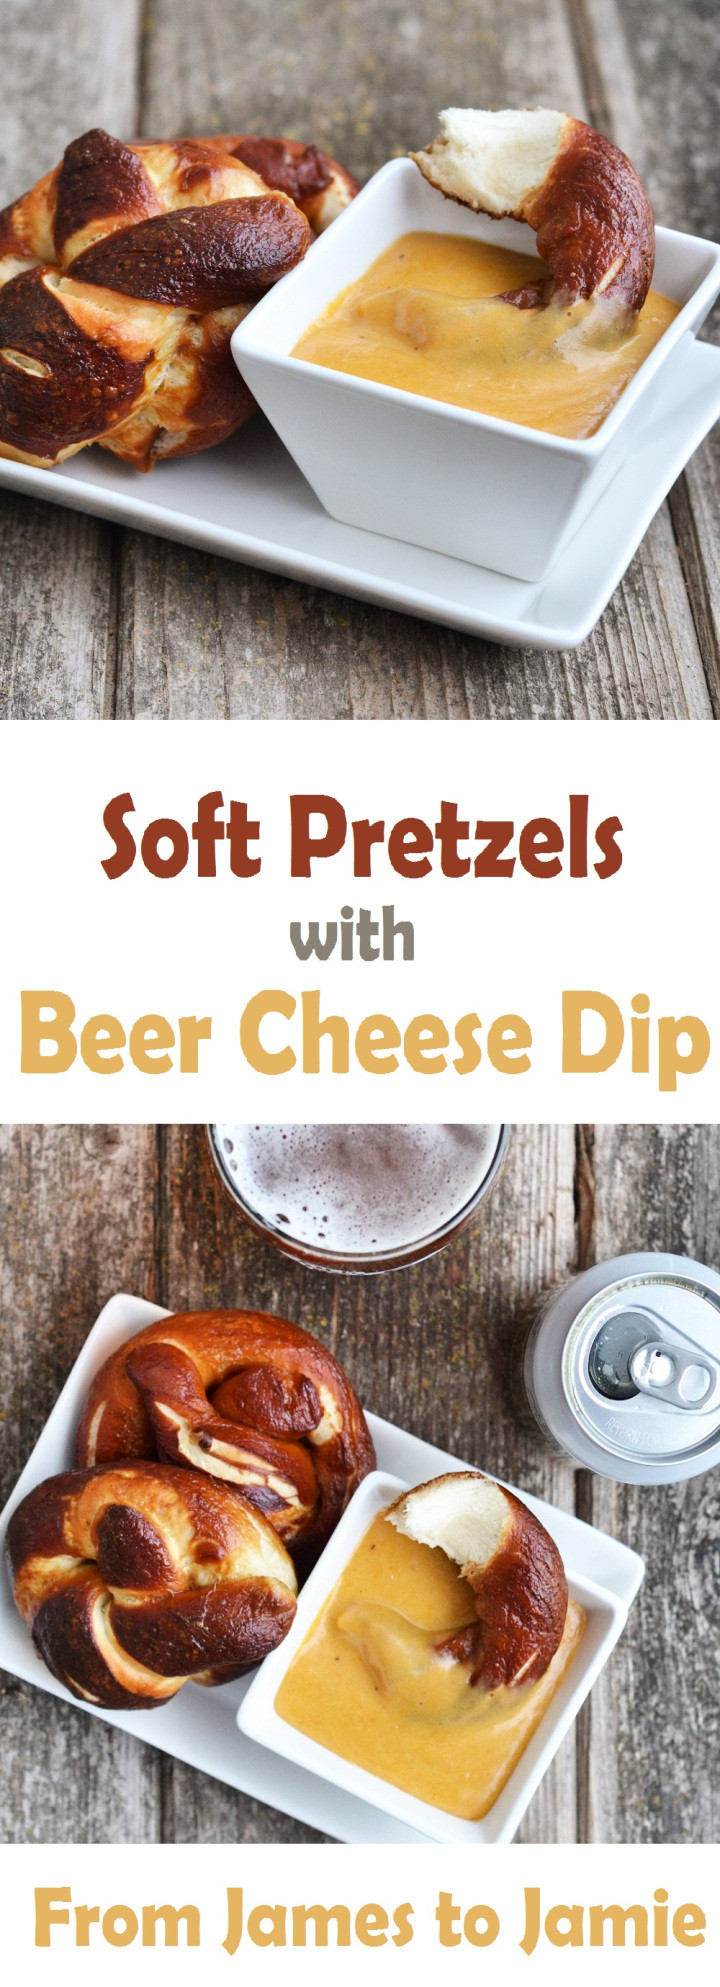 Best Beer Cheese Dip For Pretzels
 Soft Pretzels with Beer Cheese Dip – From James to Jamie